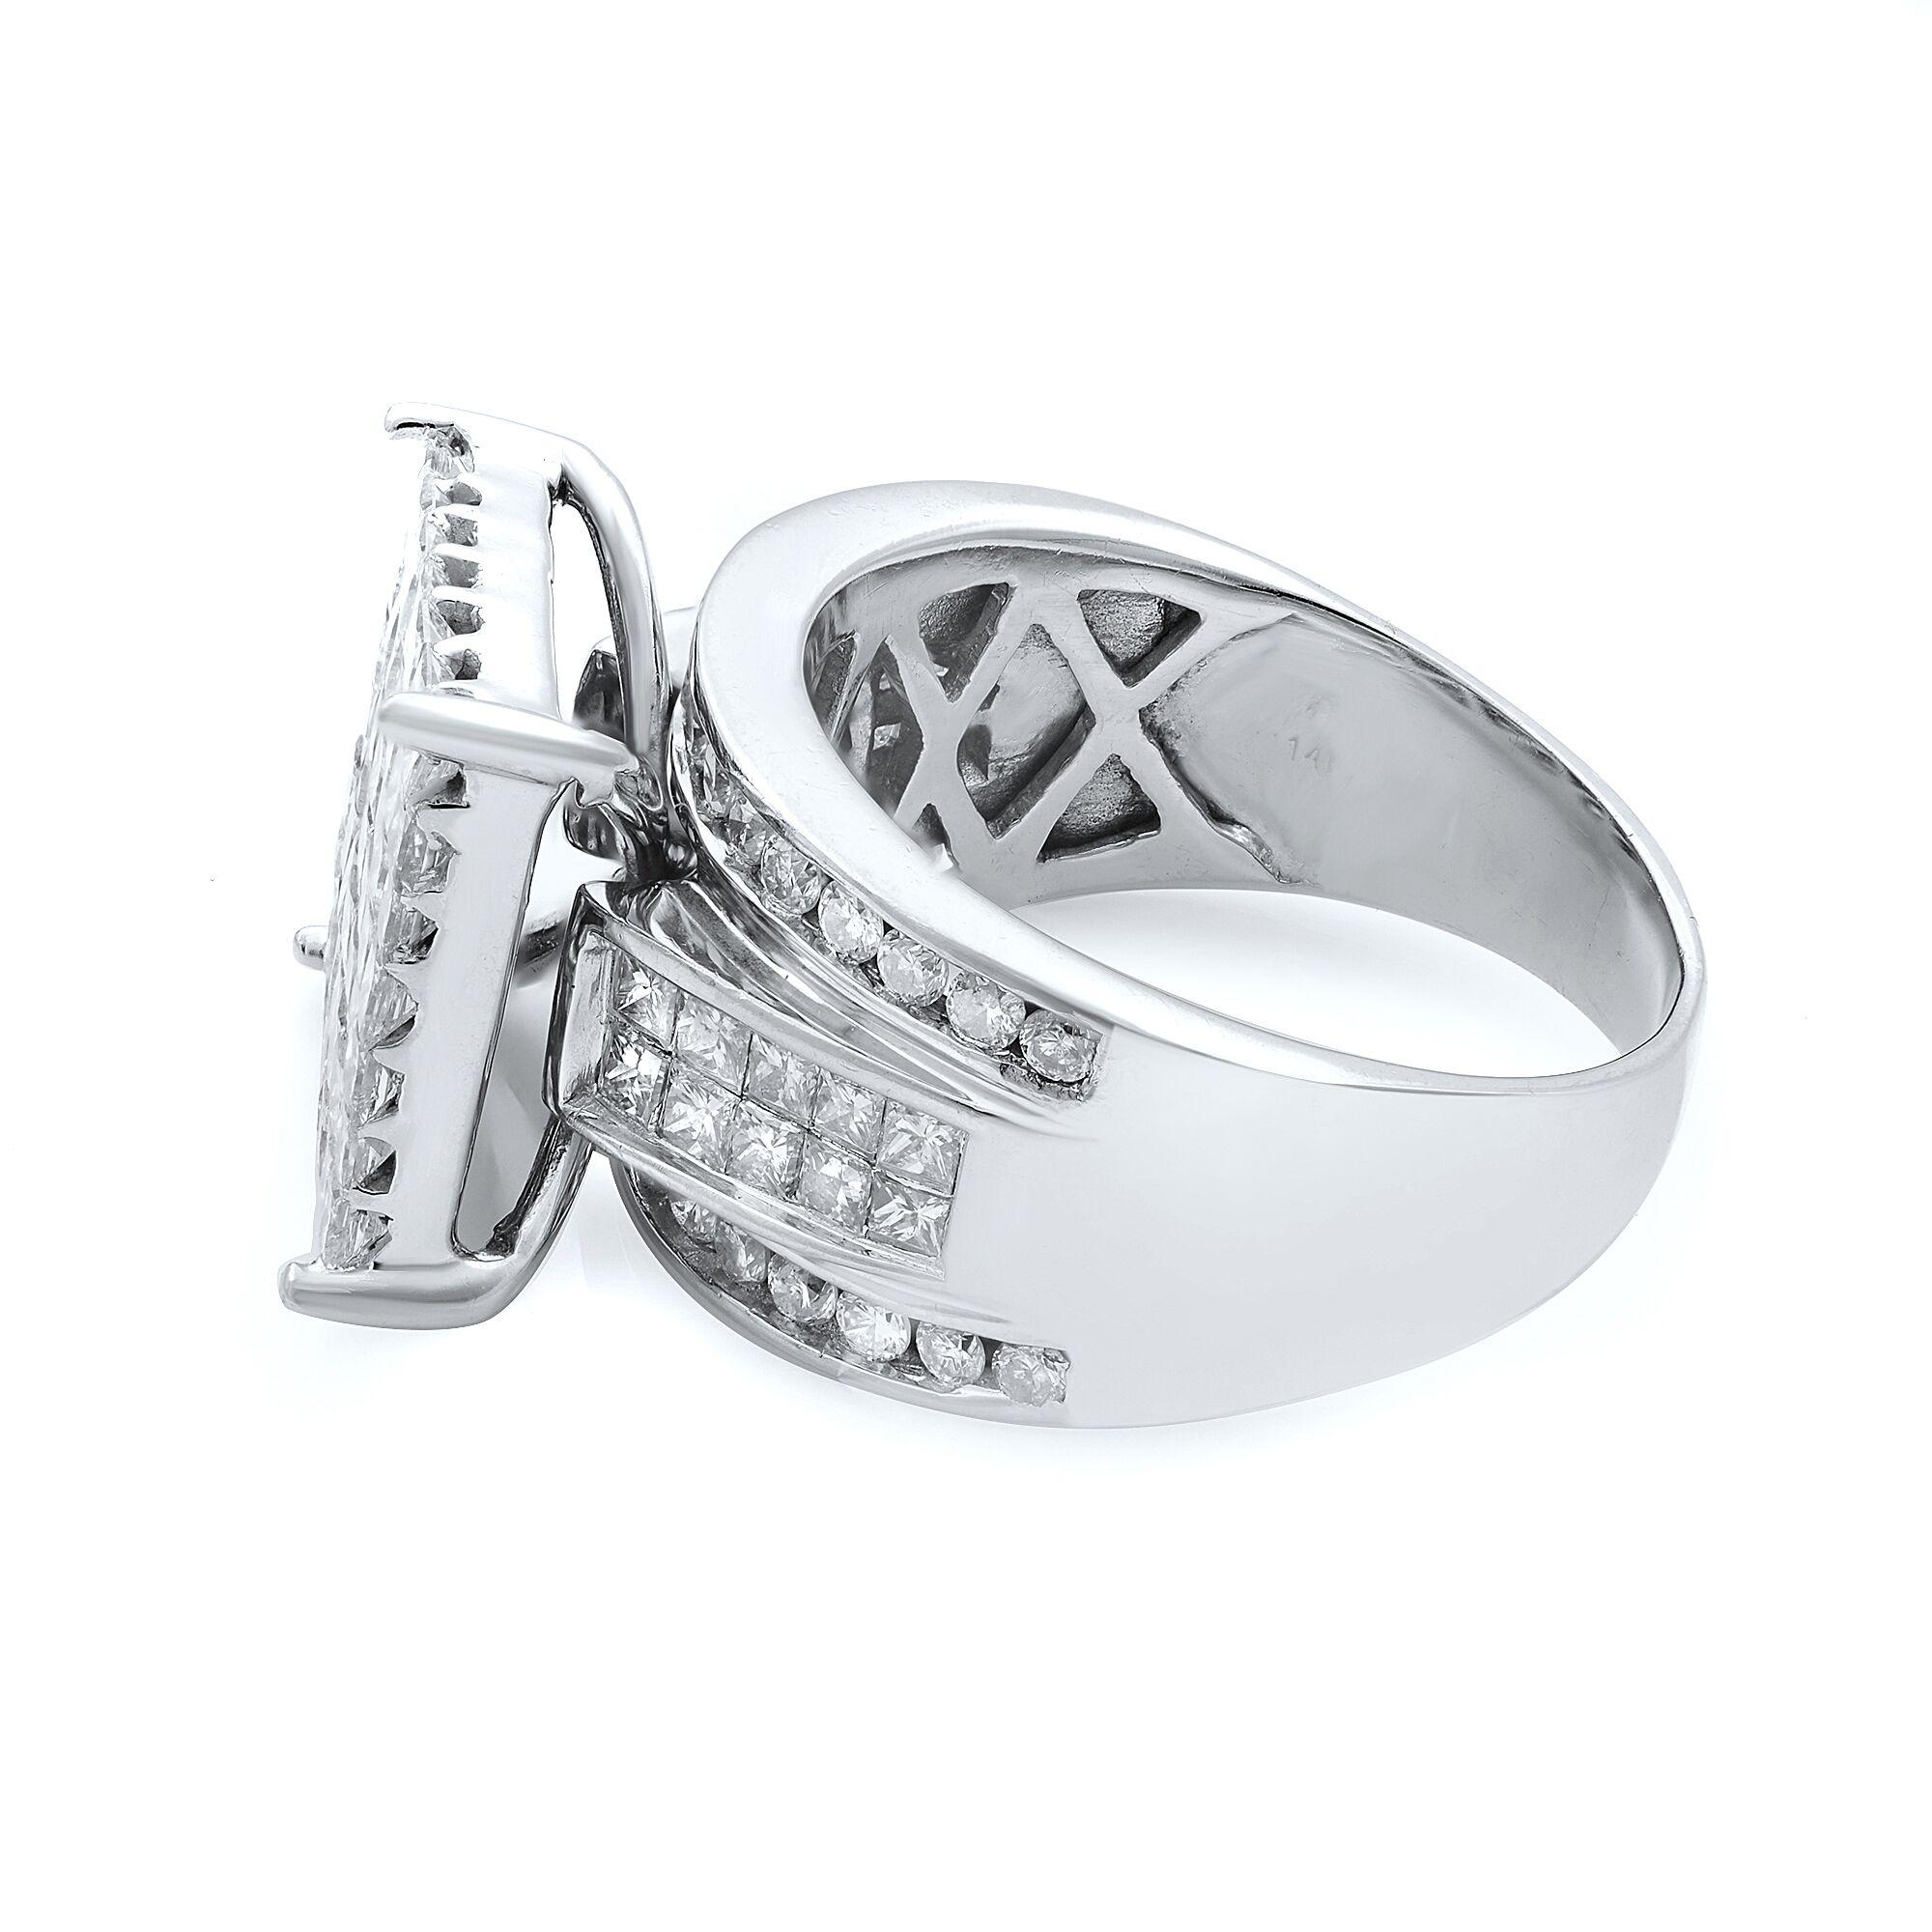 Beautifully crafted round and princess cut diamond engagement band ring set in 14k white gold with a total of 3.00 carat diamonds. The Center is shaped like a princess cut with small princess cut diamonds. Ring size 8. Comes in our presentation box. 